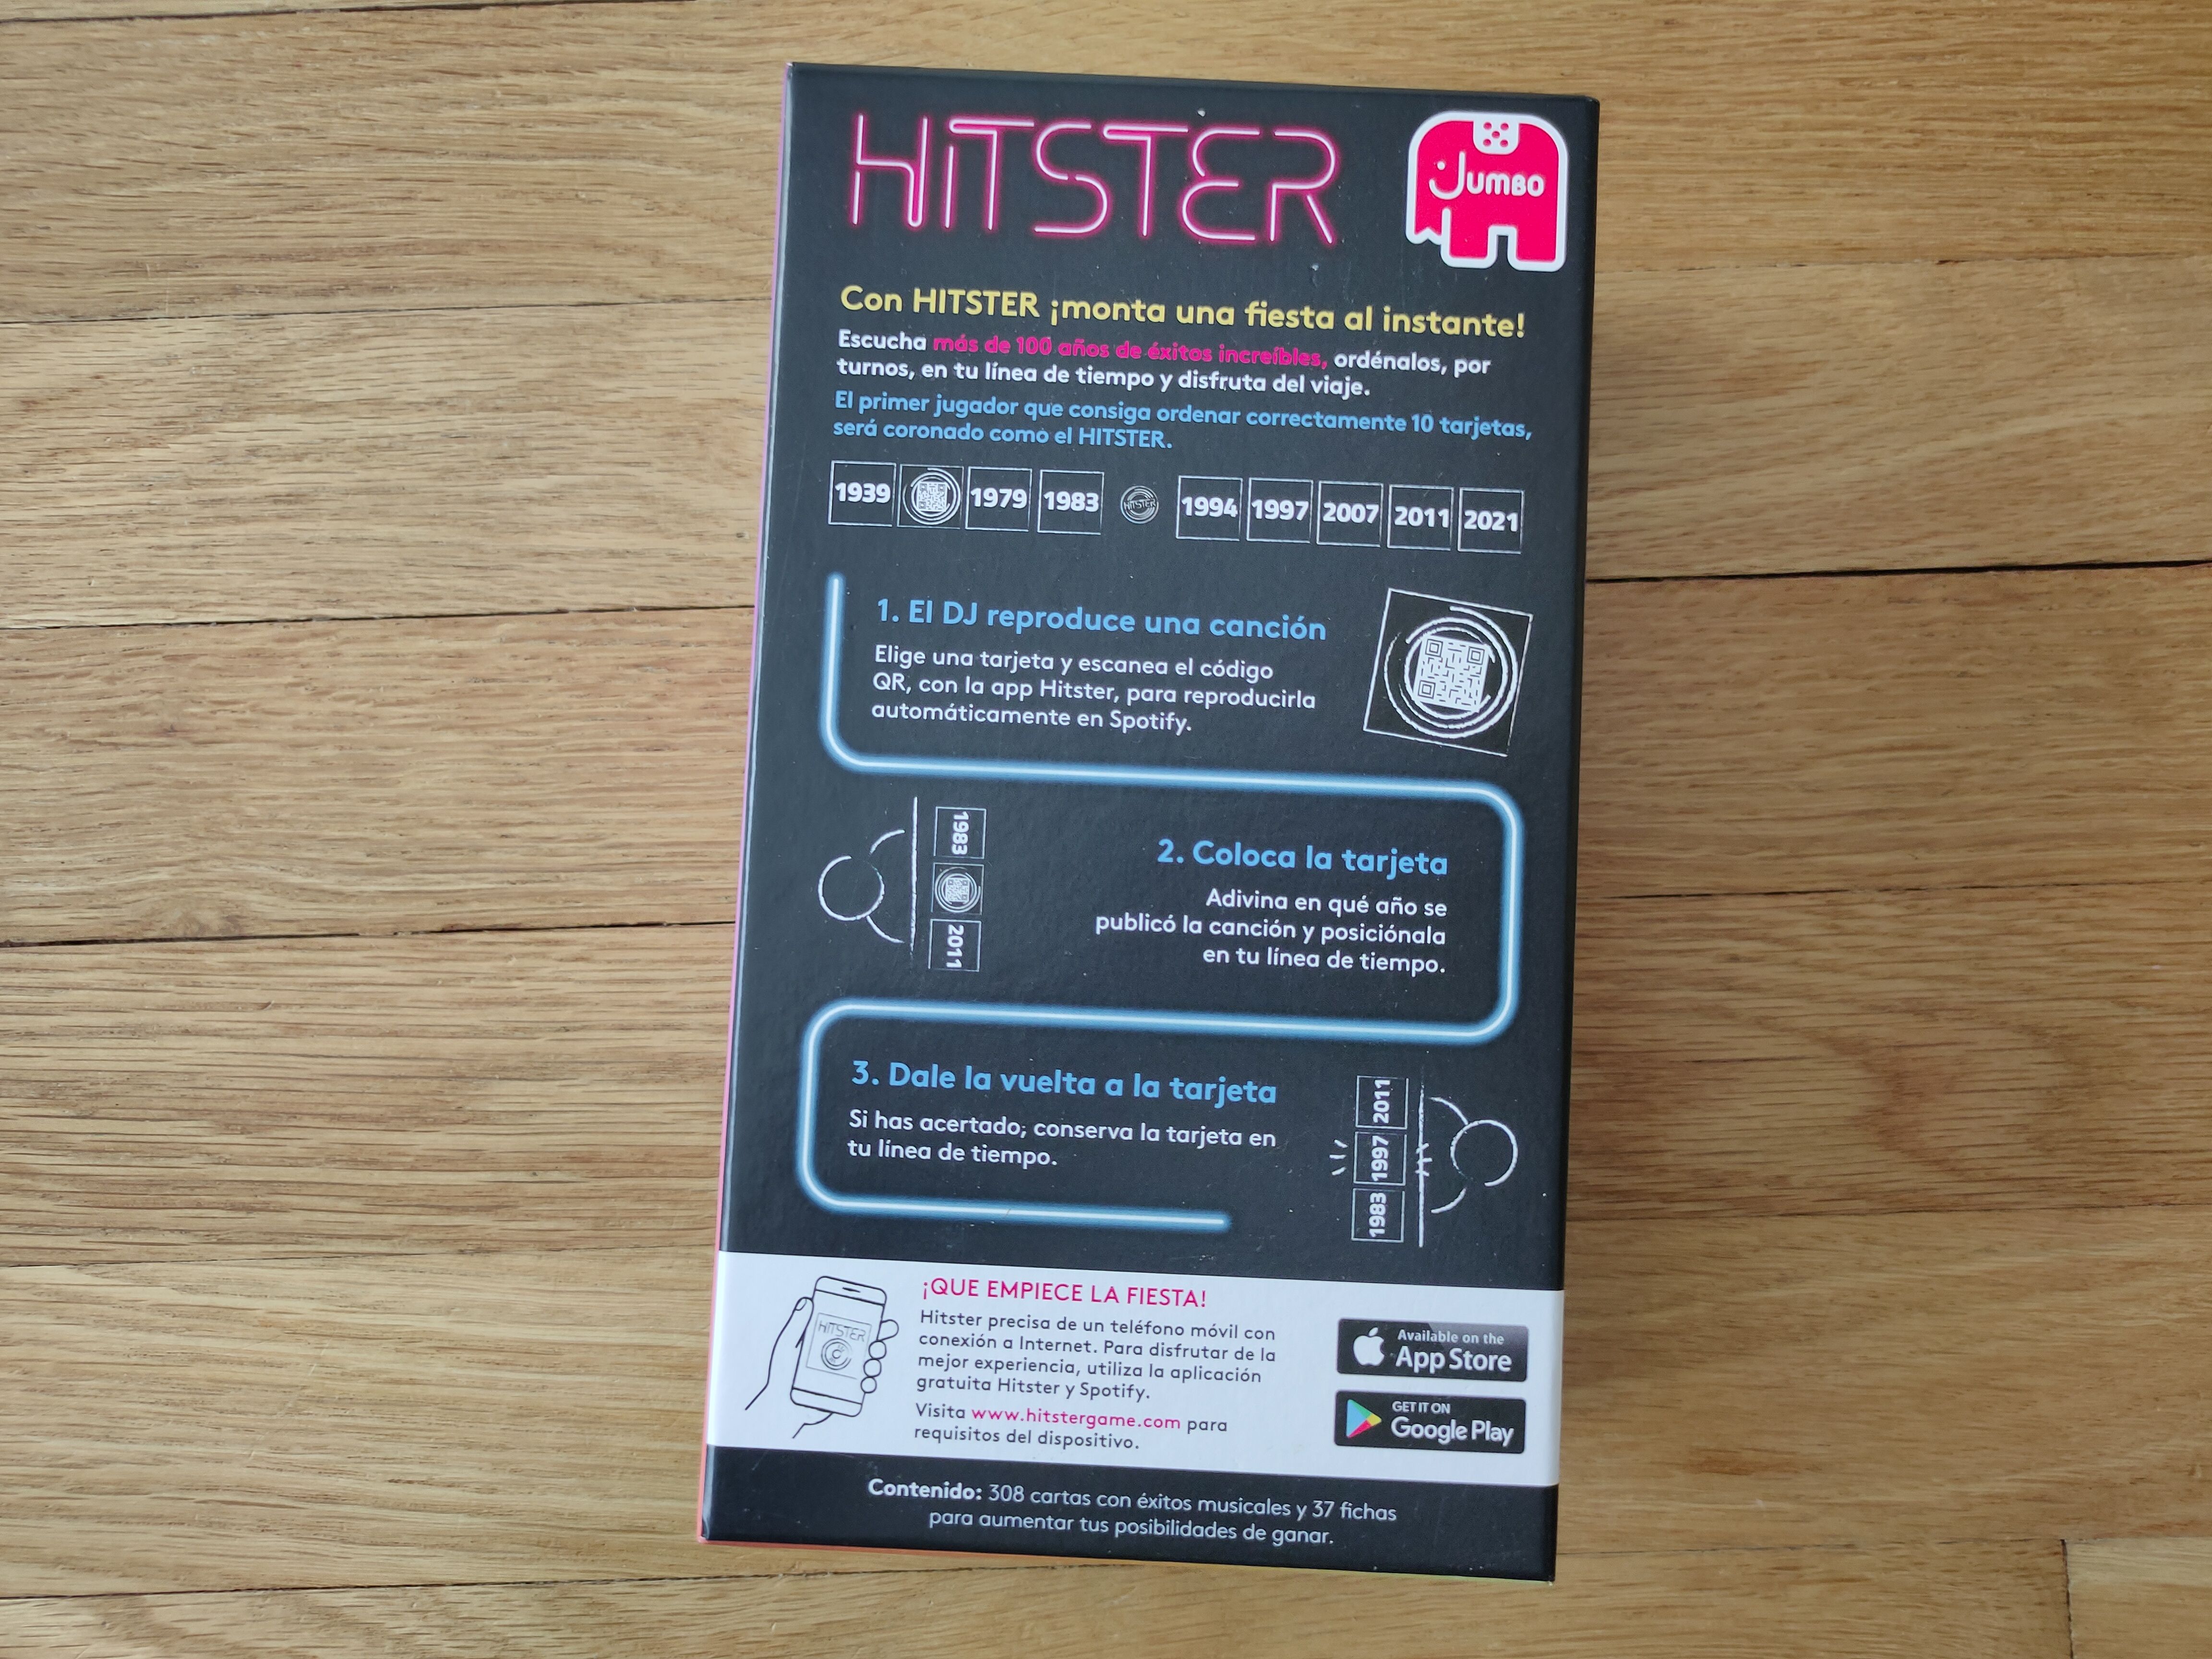 HITSTER, Image